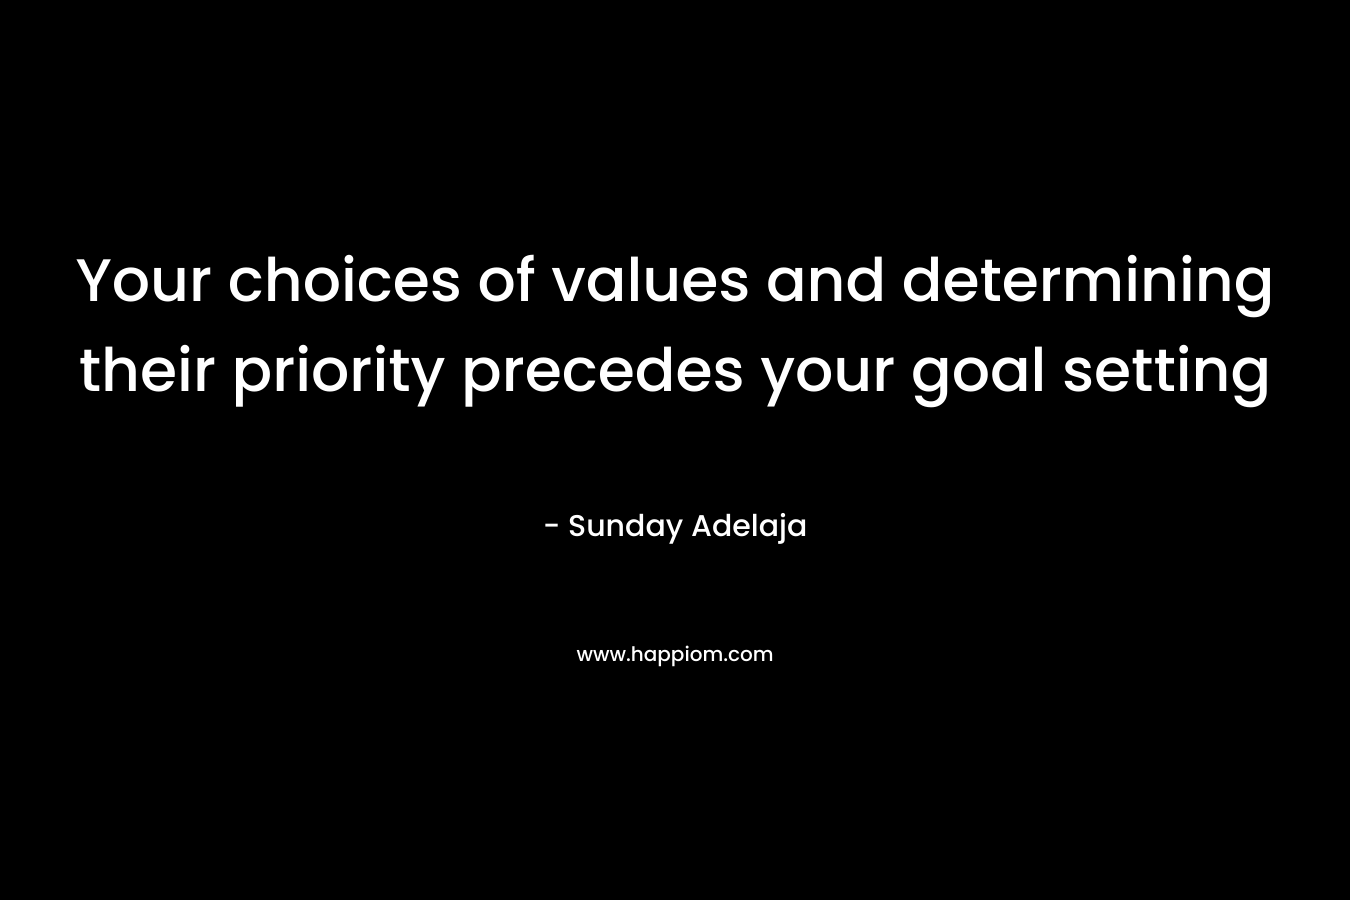 Your choices of values and determining their priority precedes your goal setting